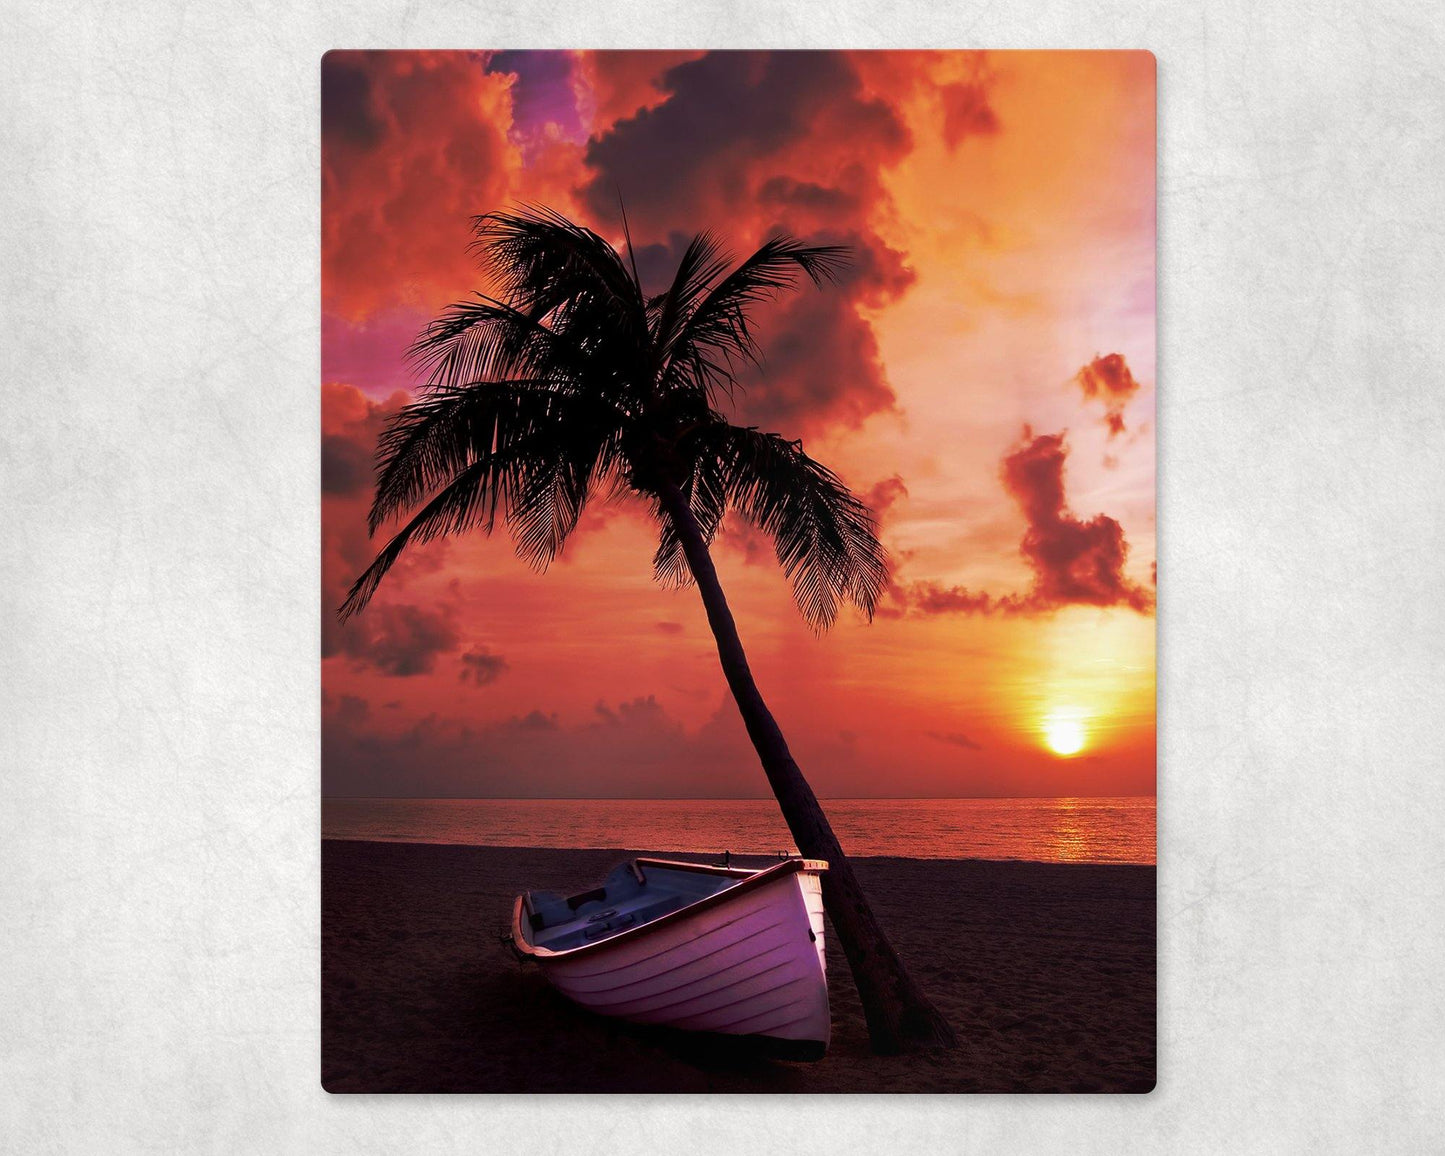 Palm Tree at Sunset Silhouette Metal Photo Panel - 8x10 - Schoppix Gifts